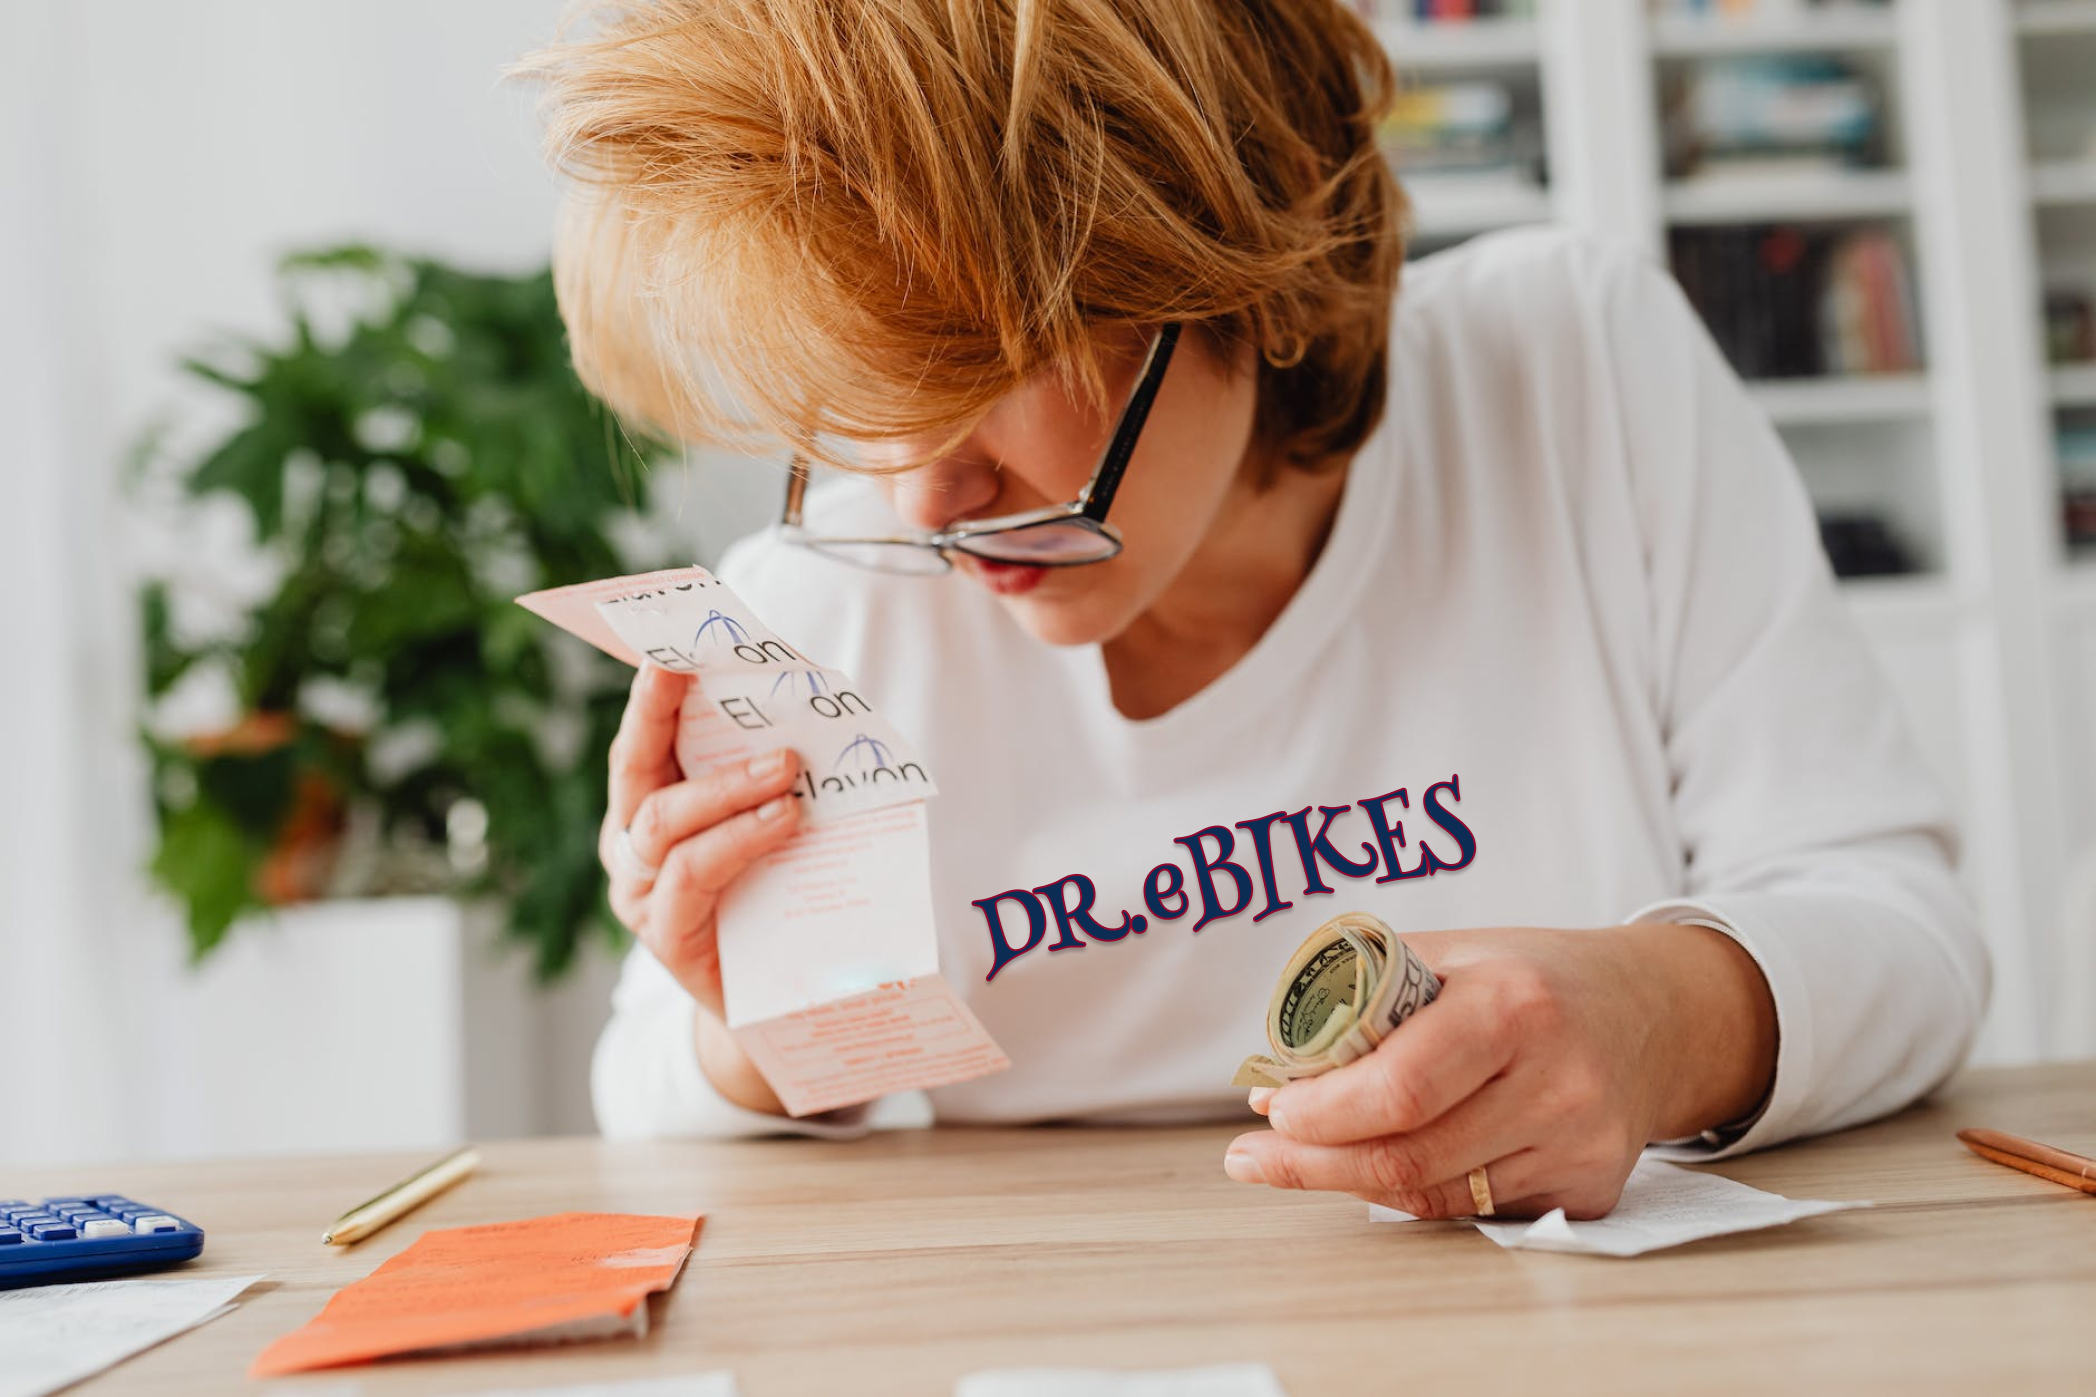 Woman with wearing glasses down on her nose looking at a receipt and money in her hand. With a LOGO of DRebikes on her t-shirt, wondering if it's a good investment.